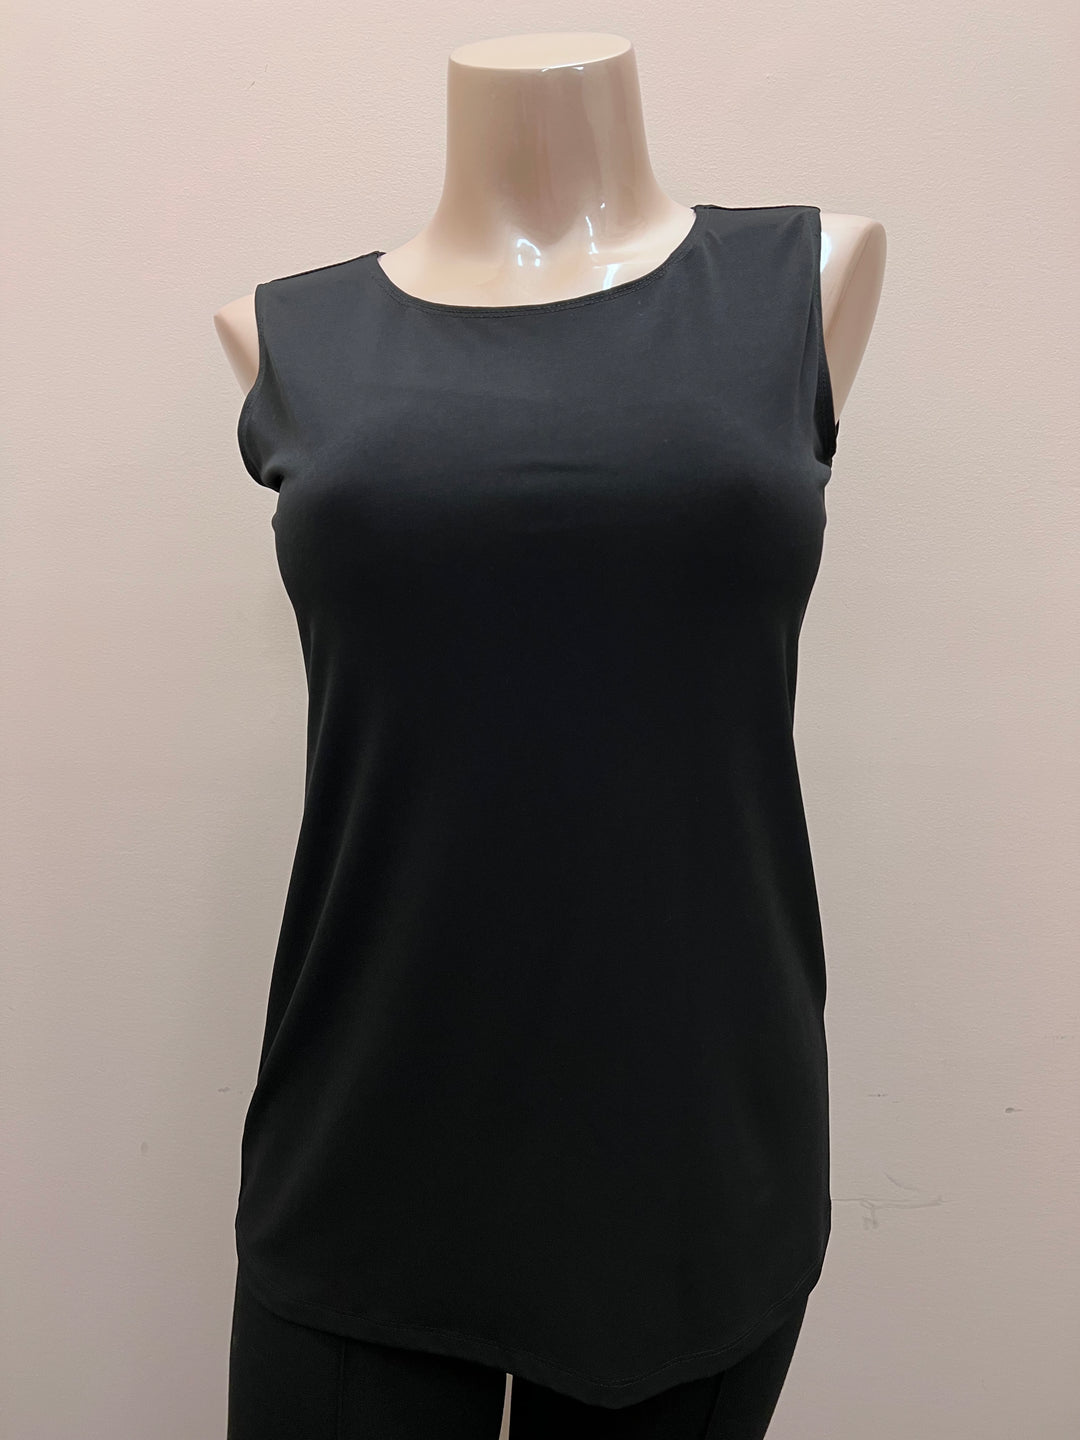 Soft Works Tank Top